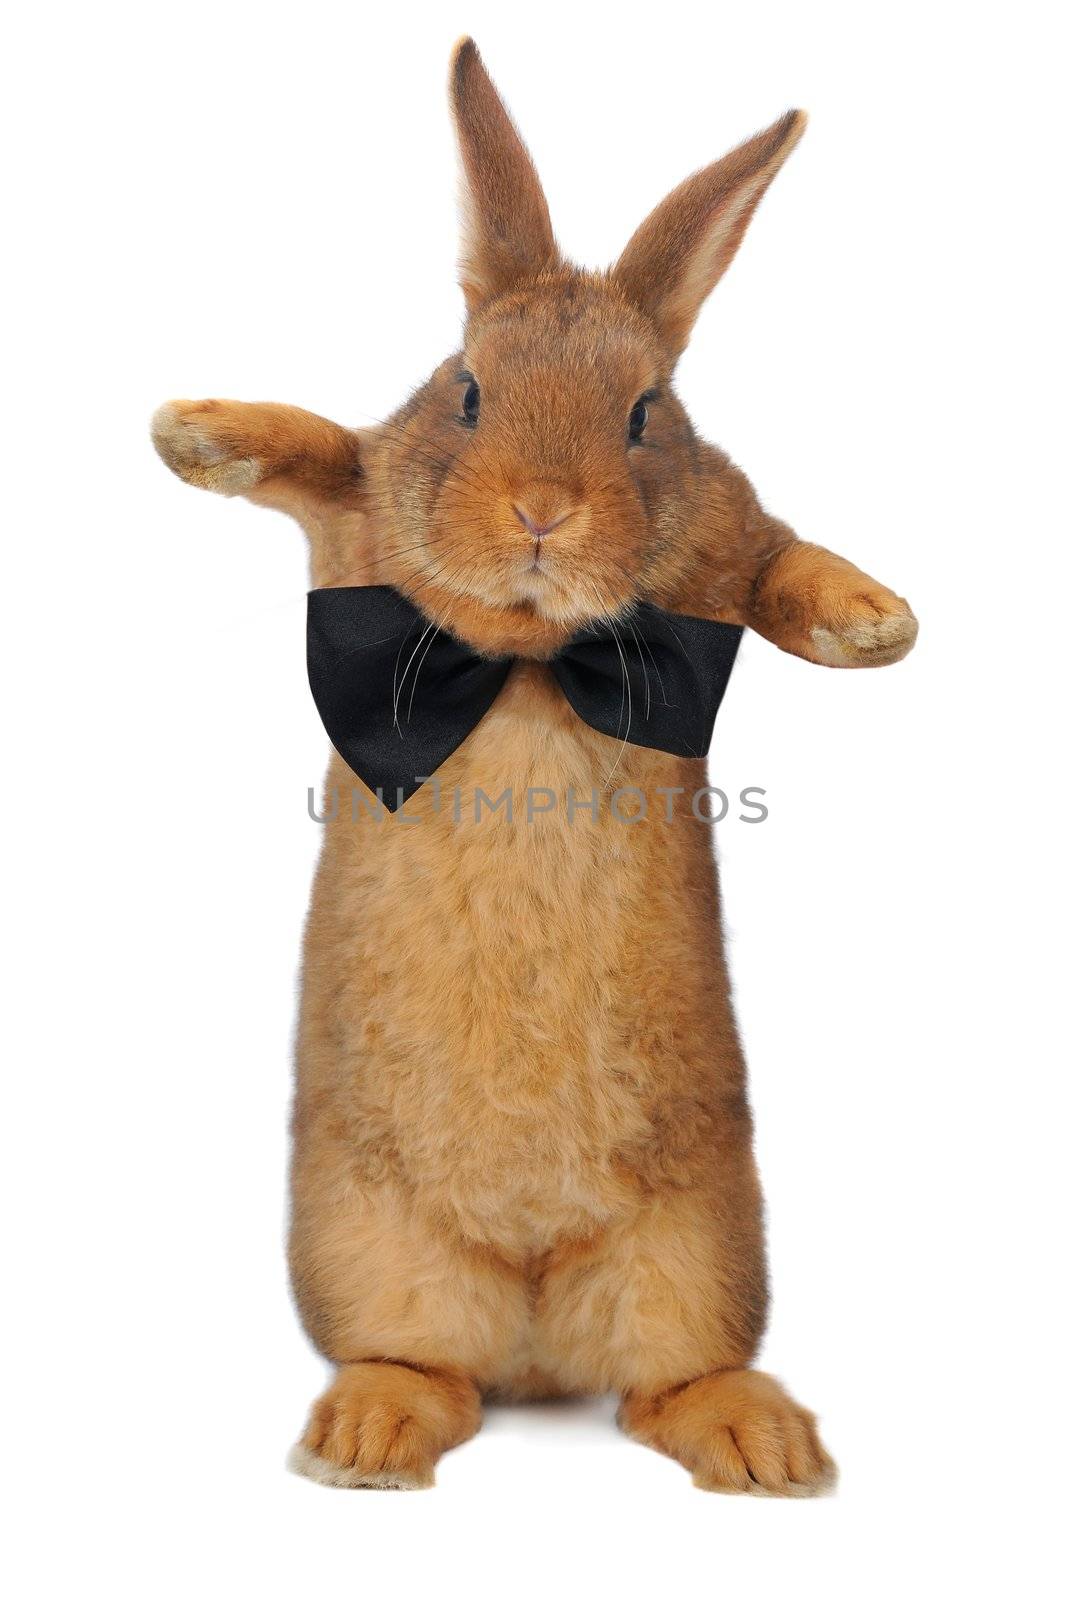 Standing, a rabbit on a white background